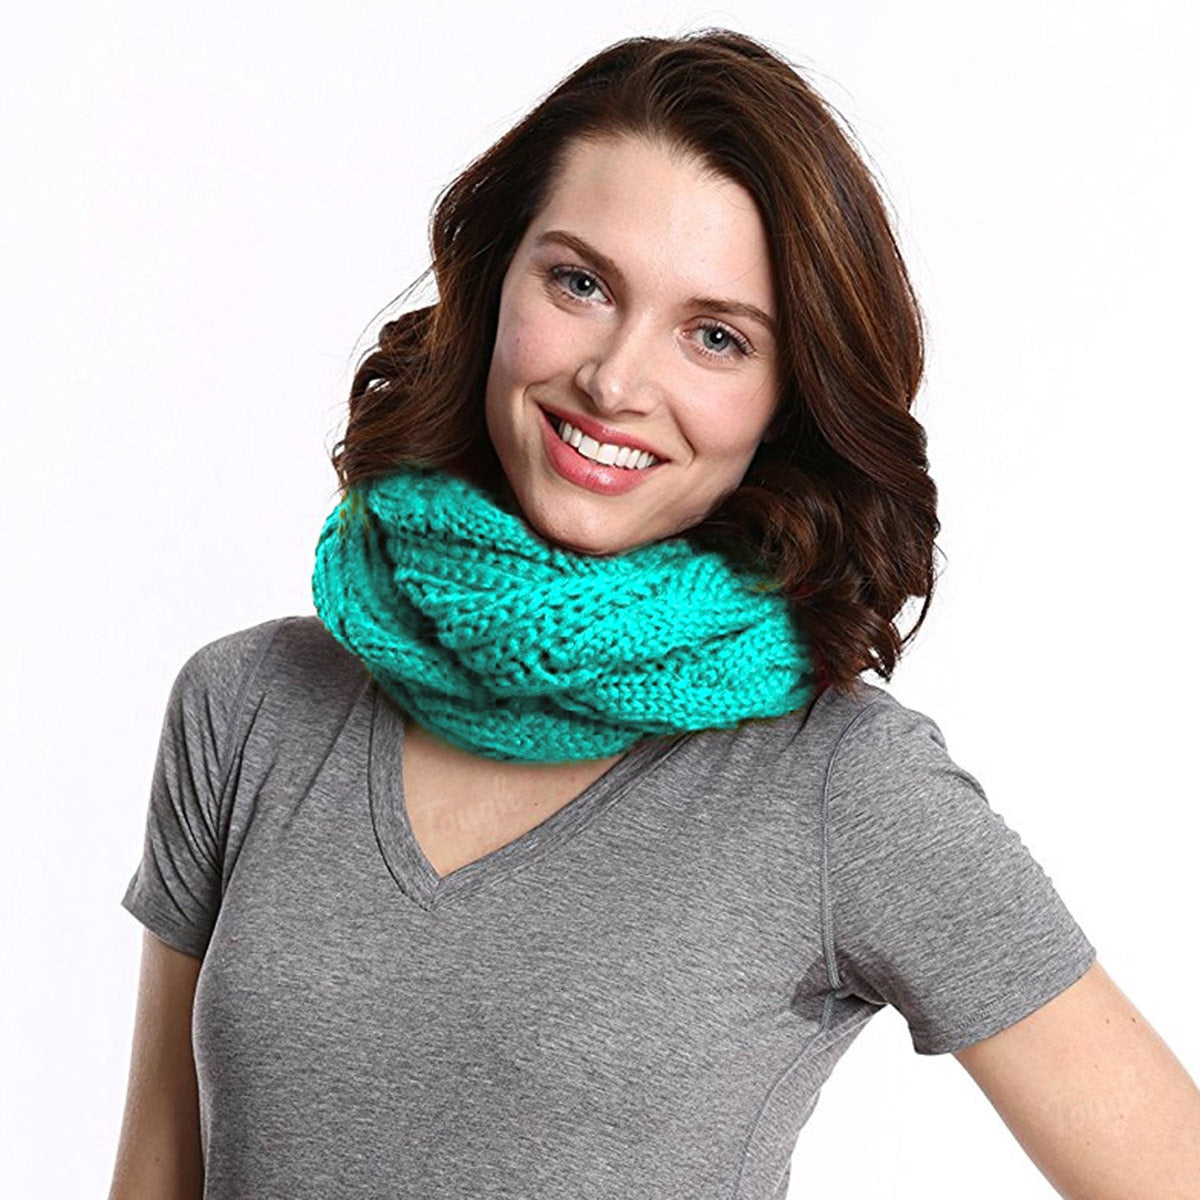 Women's Cable Knit Infinity Scarf By Tickled Pink – Soft, Versatile